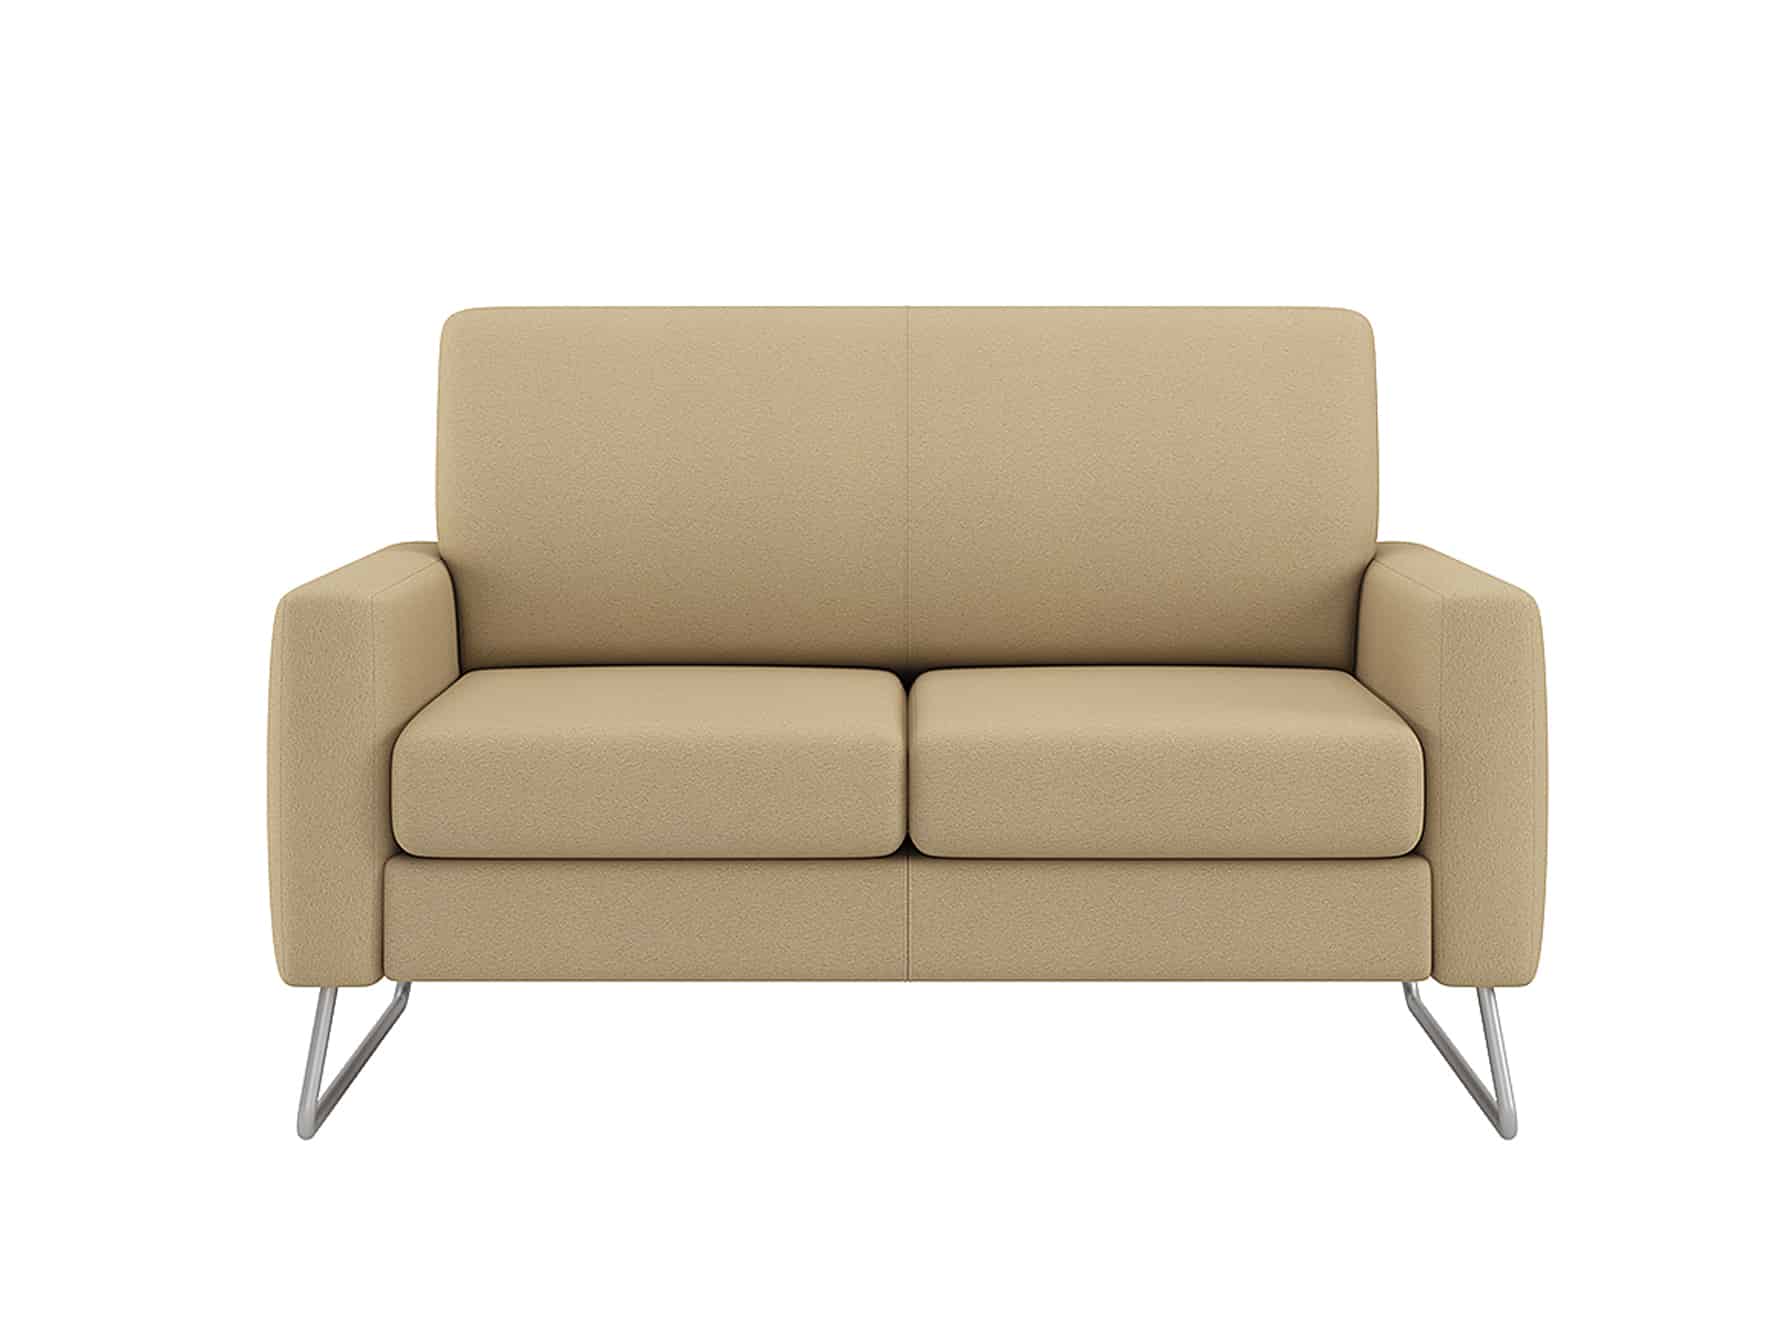 Chill Loveseat Campus Apartment Furniture for College Students